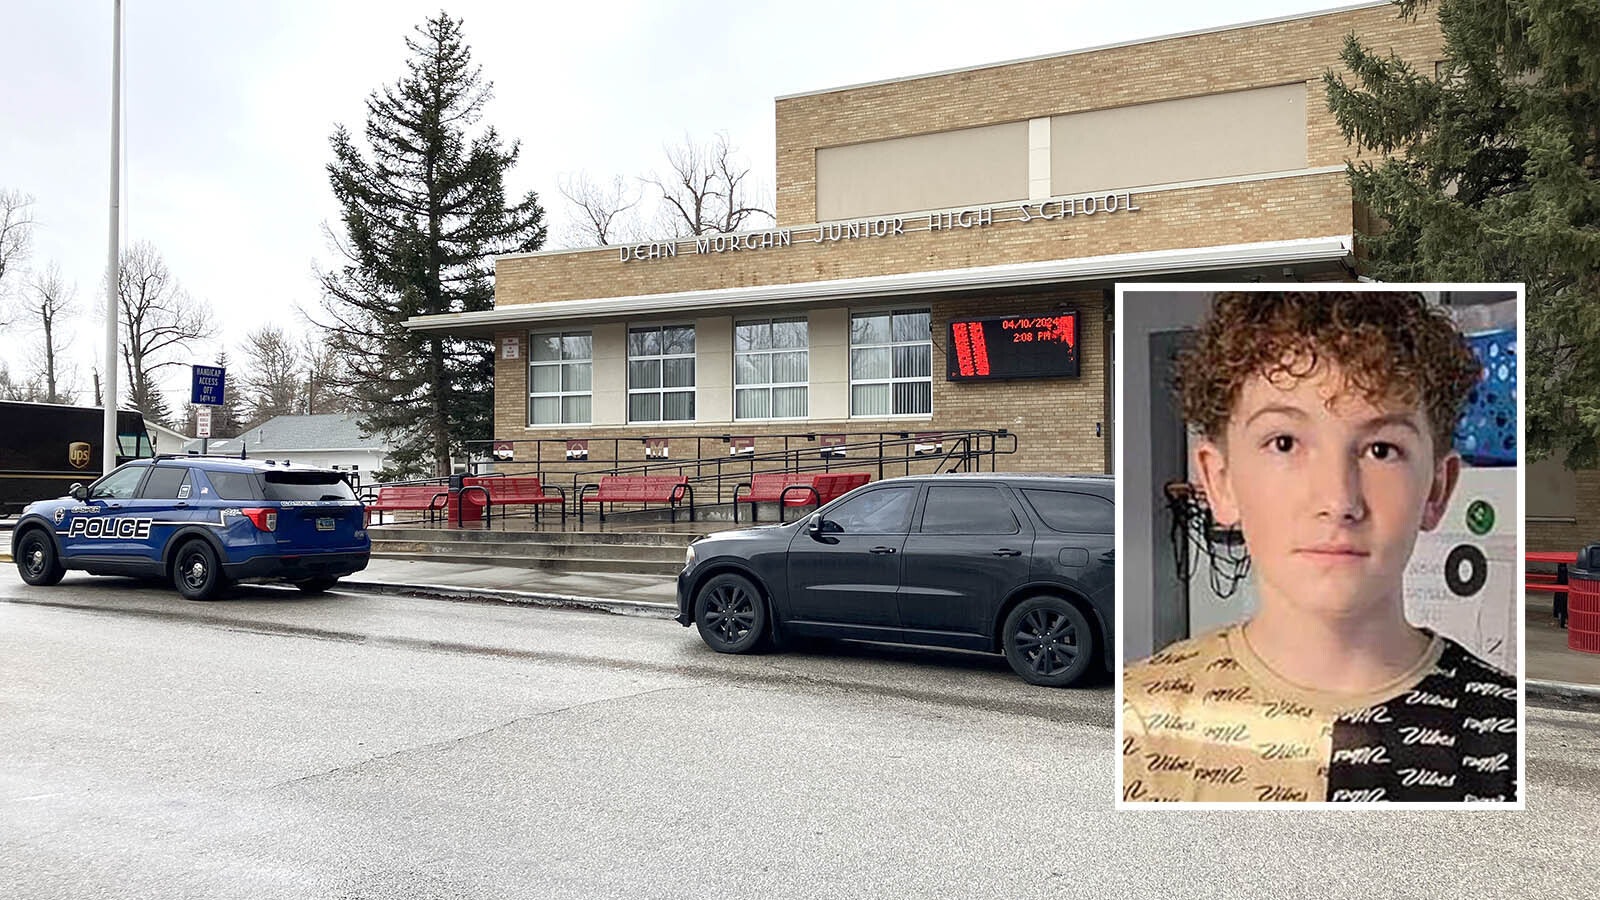 The principal at Dean Morgan Middle School, where slain 14-year-old Bobby Maher attended, said counseling and support services have been ongoing this week following the stabbing incident at the Eastridge Mall on Sunday.